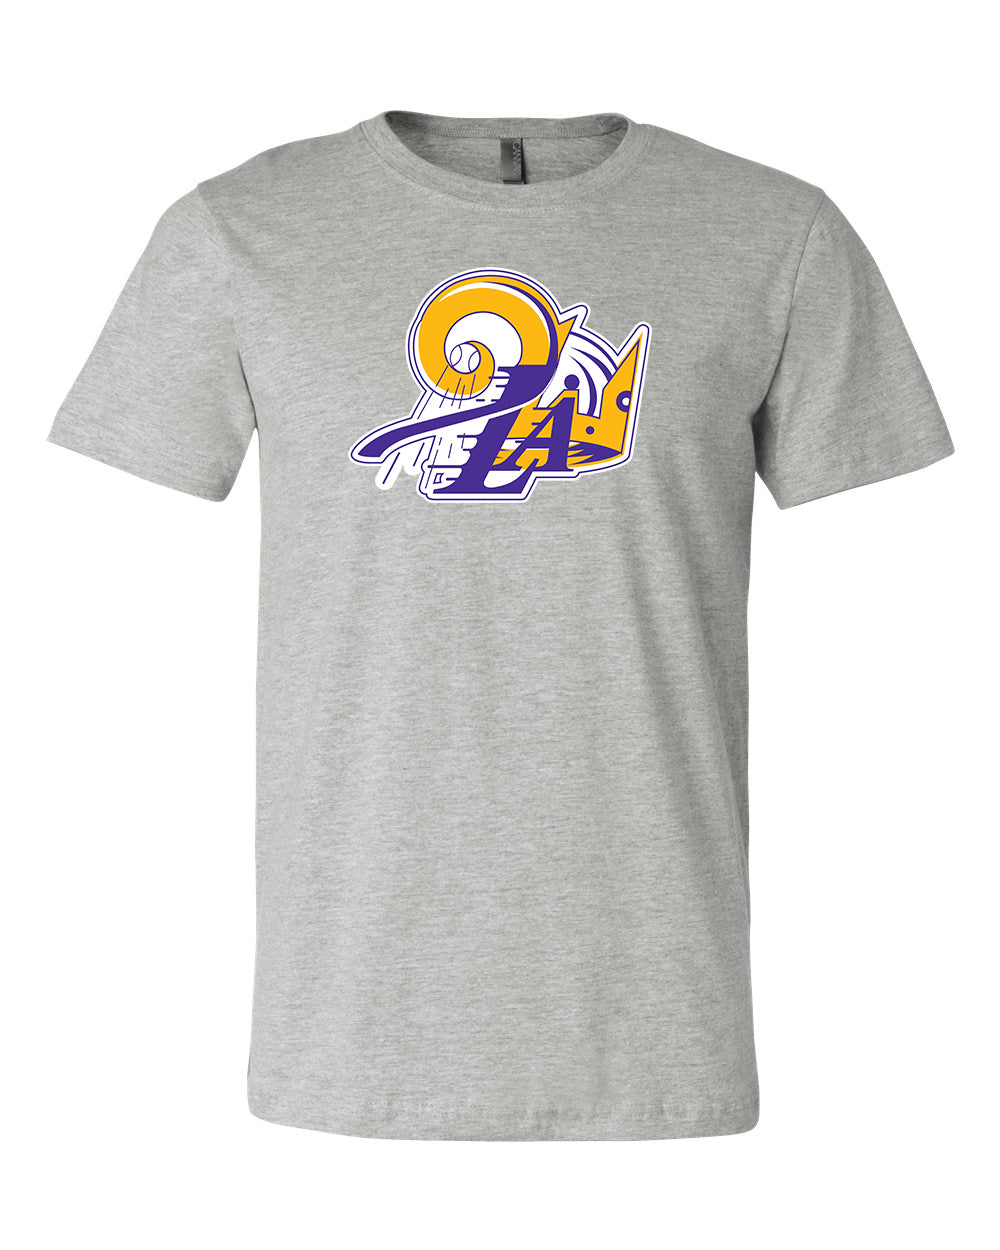 lakers and dodgers shirt